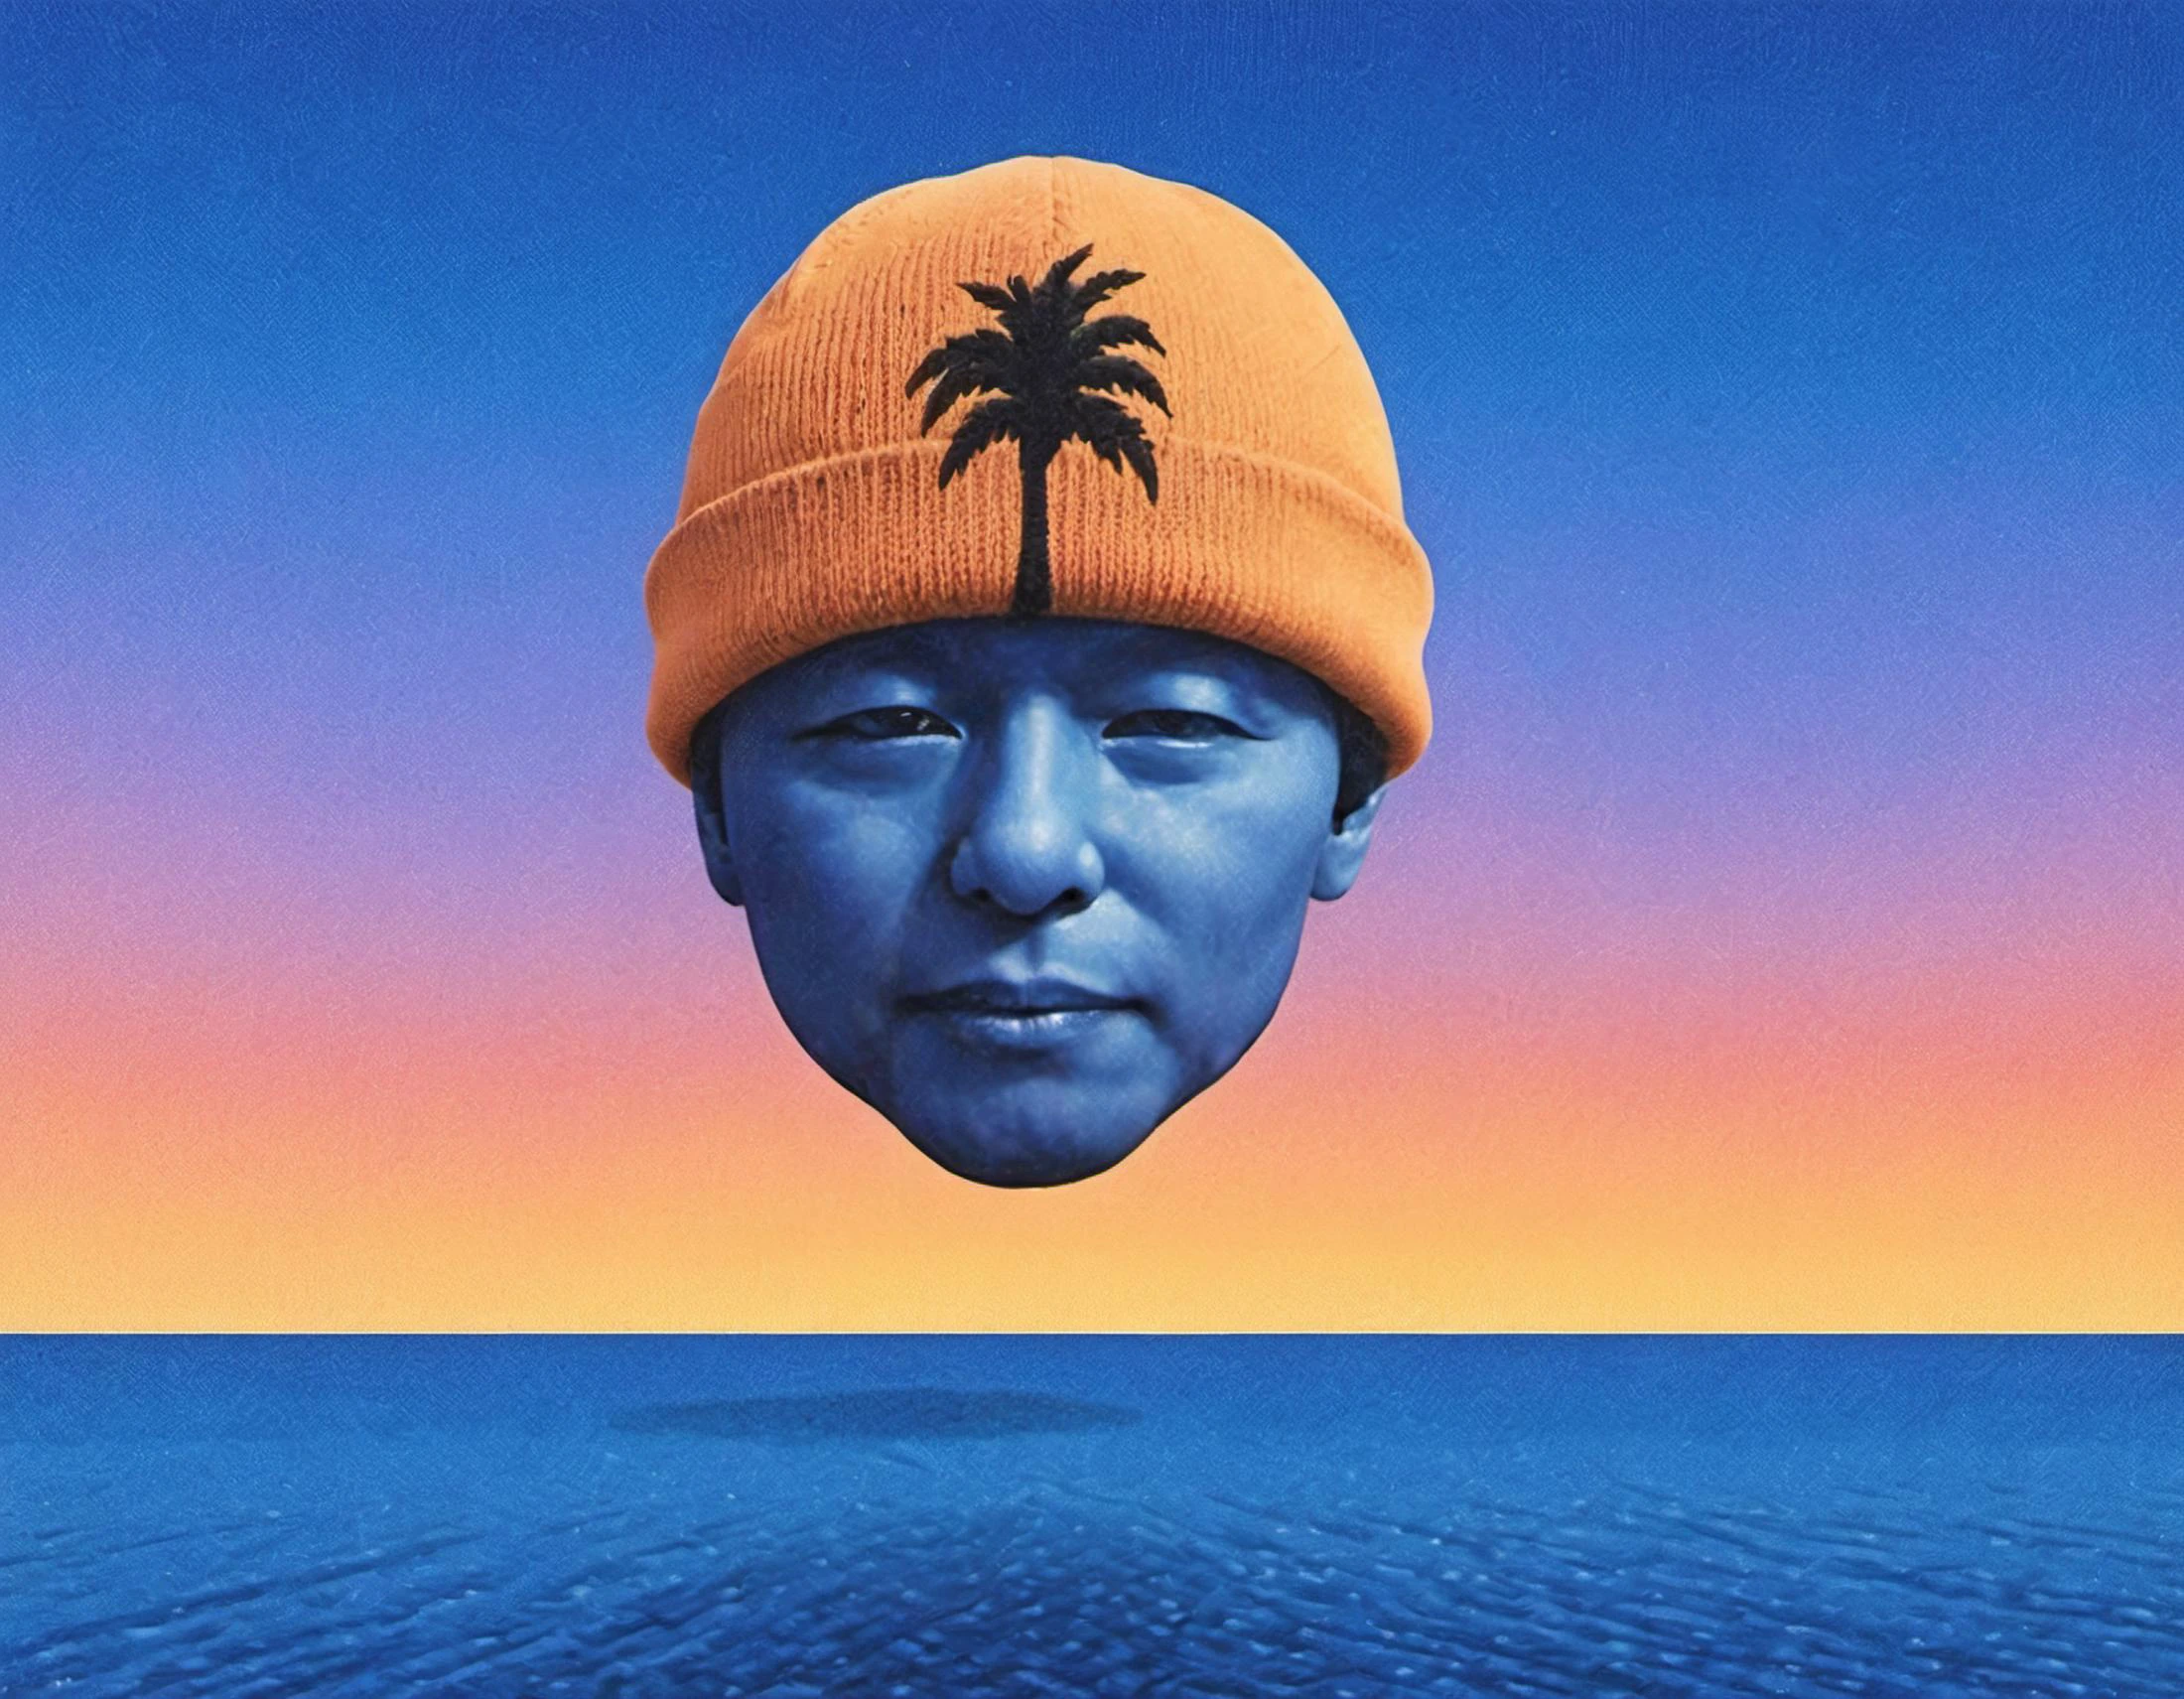 beach, palm tree, the sun has morphed into the glowing shape of the disembodied head of a man in a knit cap floating in the sky, gradient sky, 